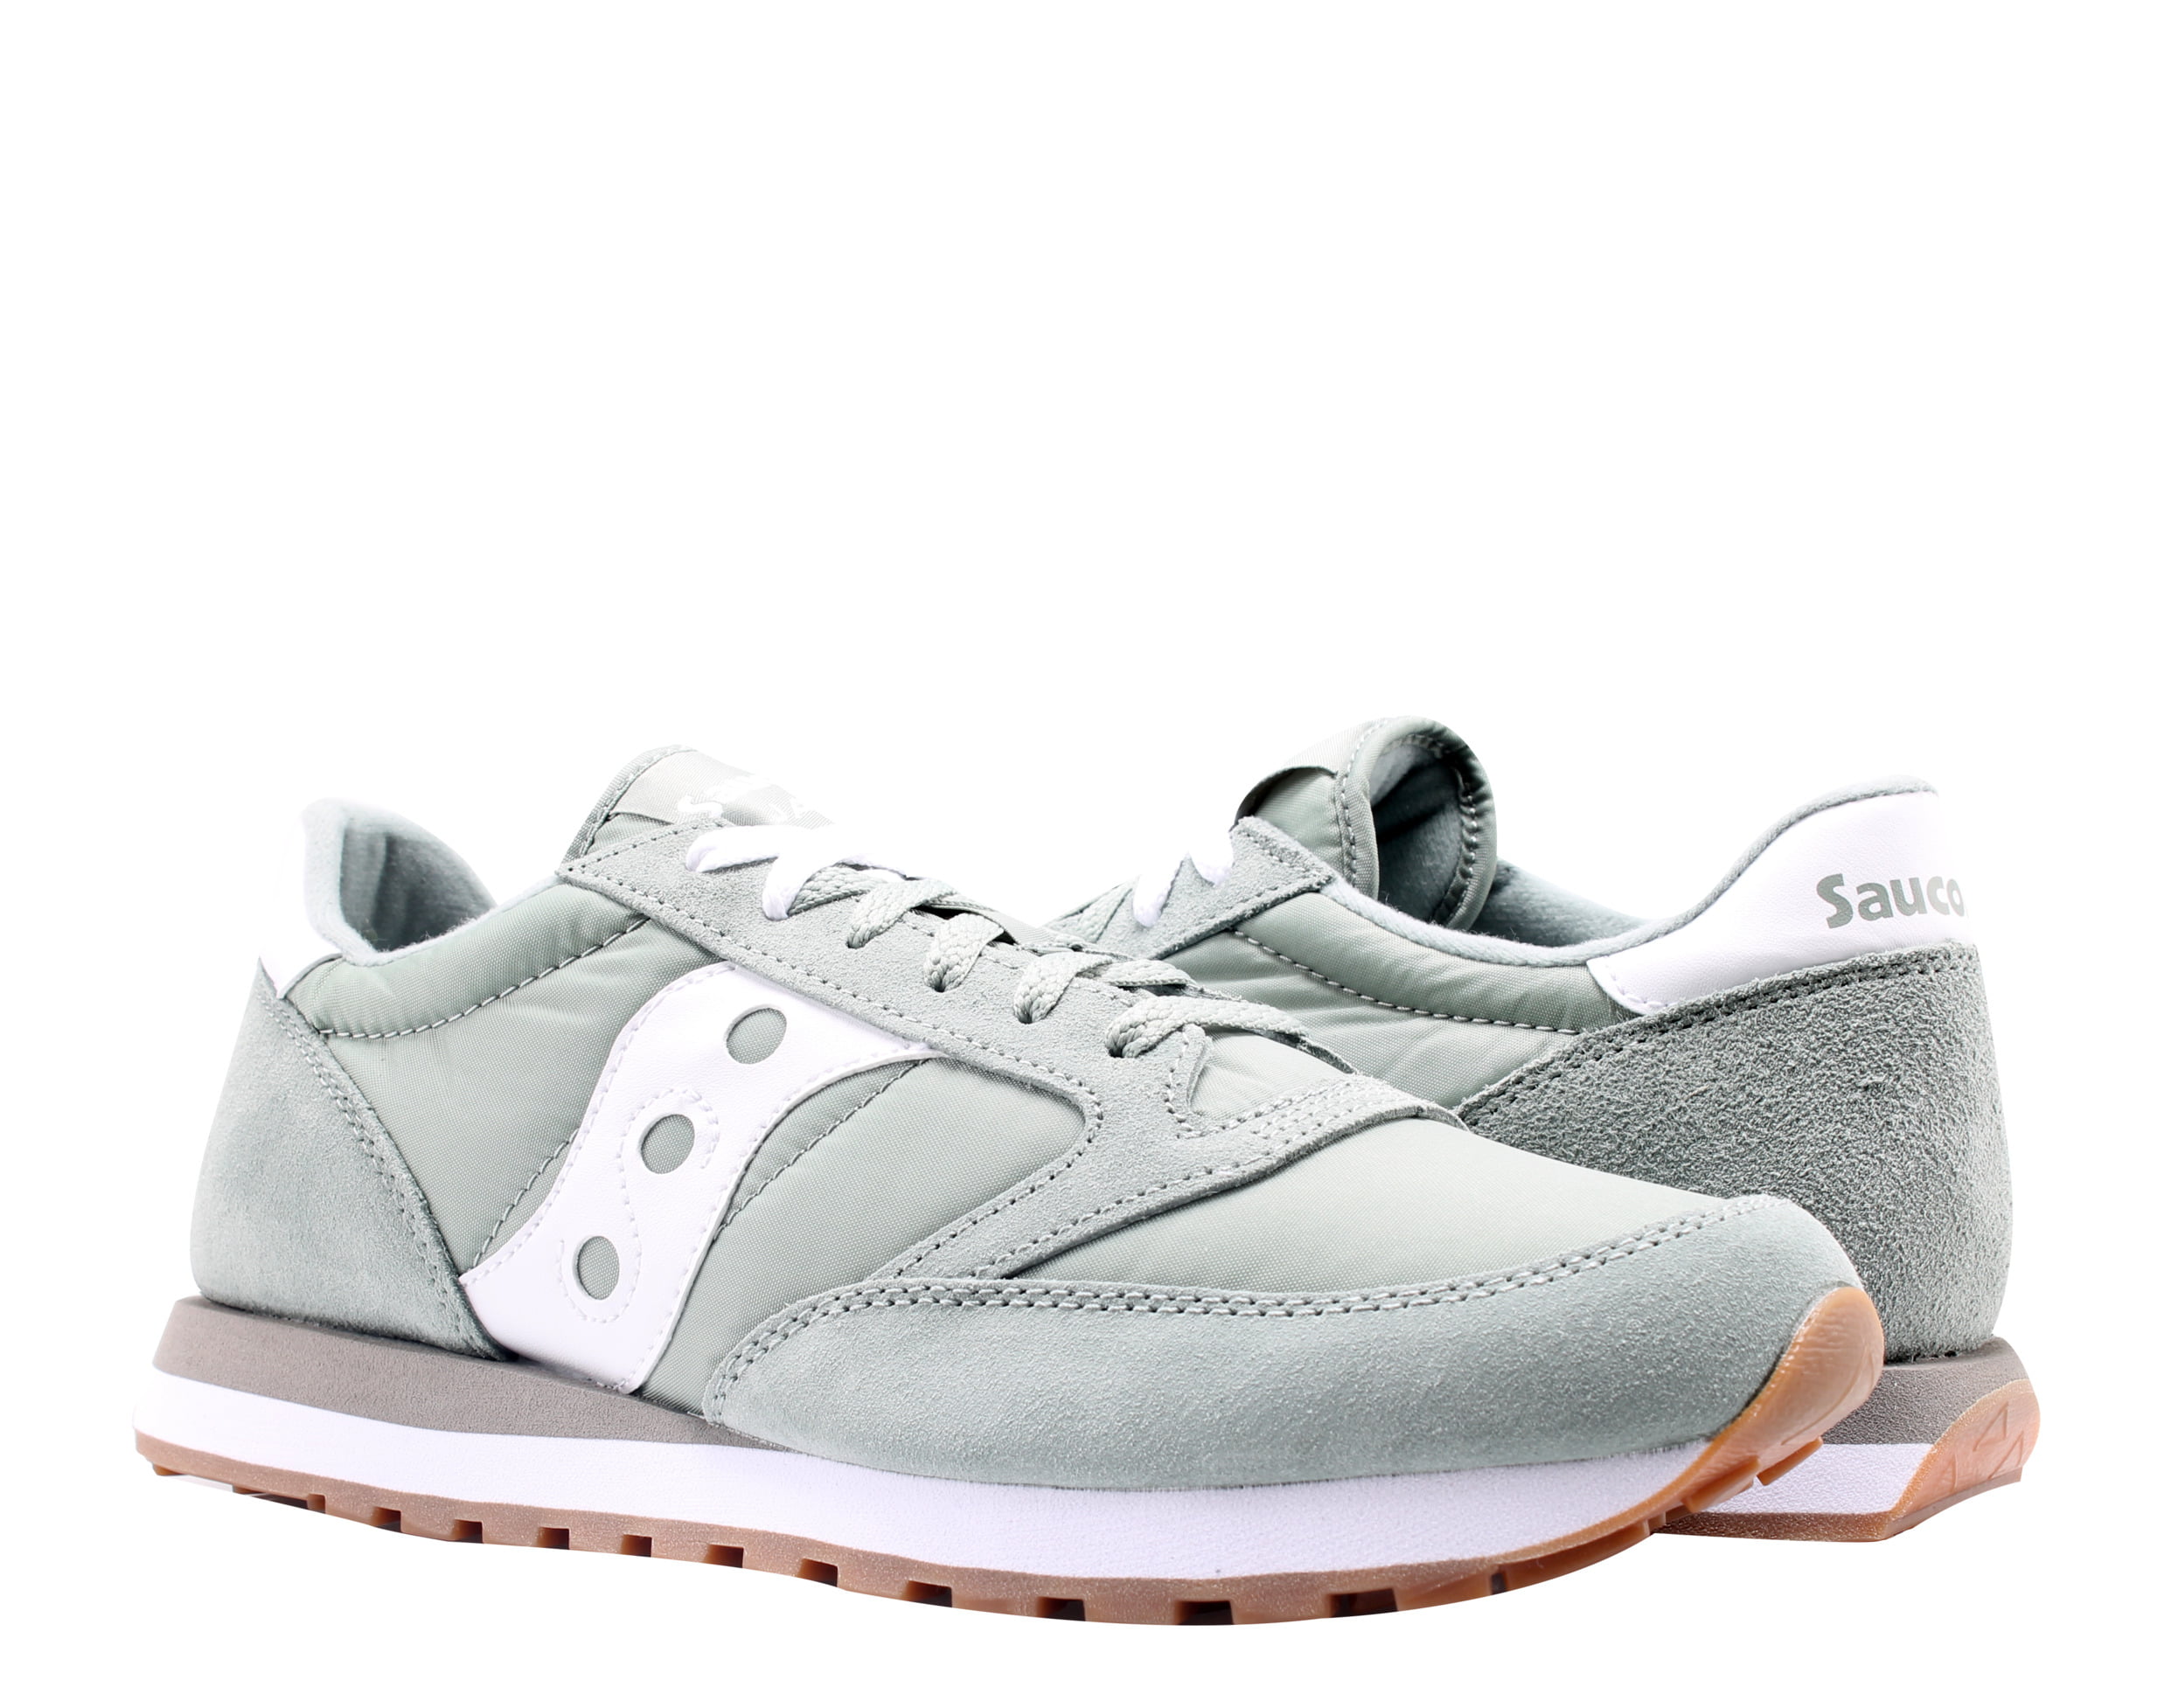 saucony jazz dance shoes, OFF 74%,Free 